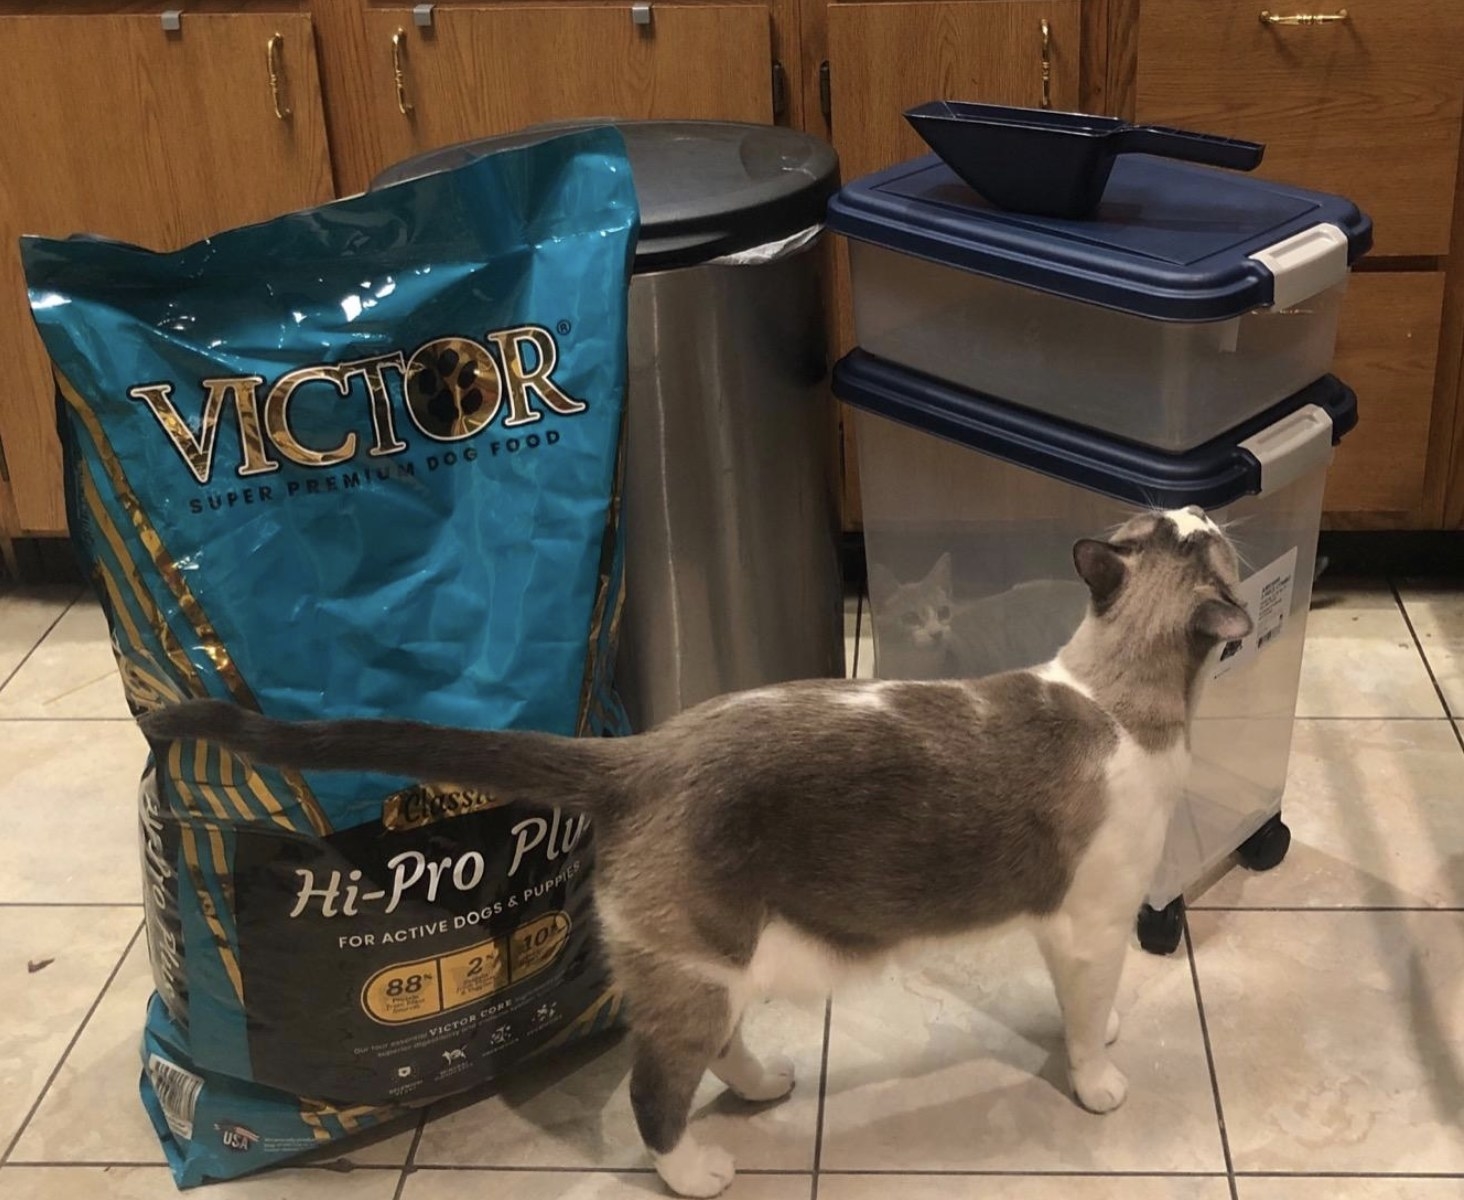 a cat infront of a blue and transluscent double-tiered plastic cat food container, a bag of dry food, and a trash can for size comparison